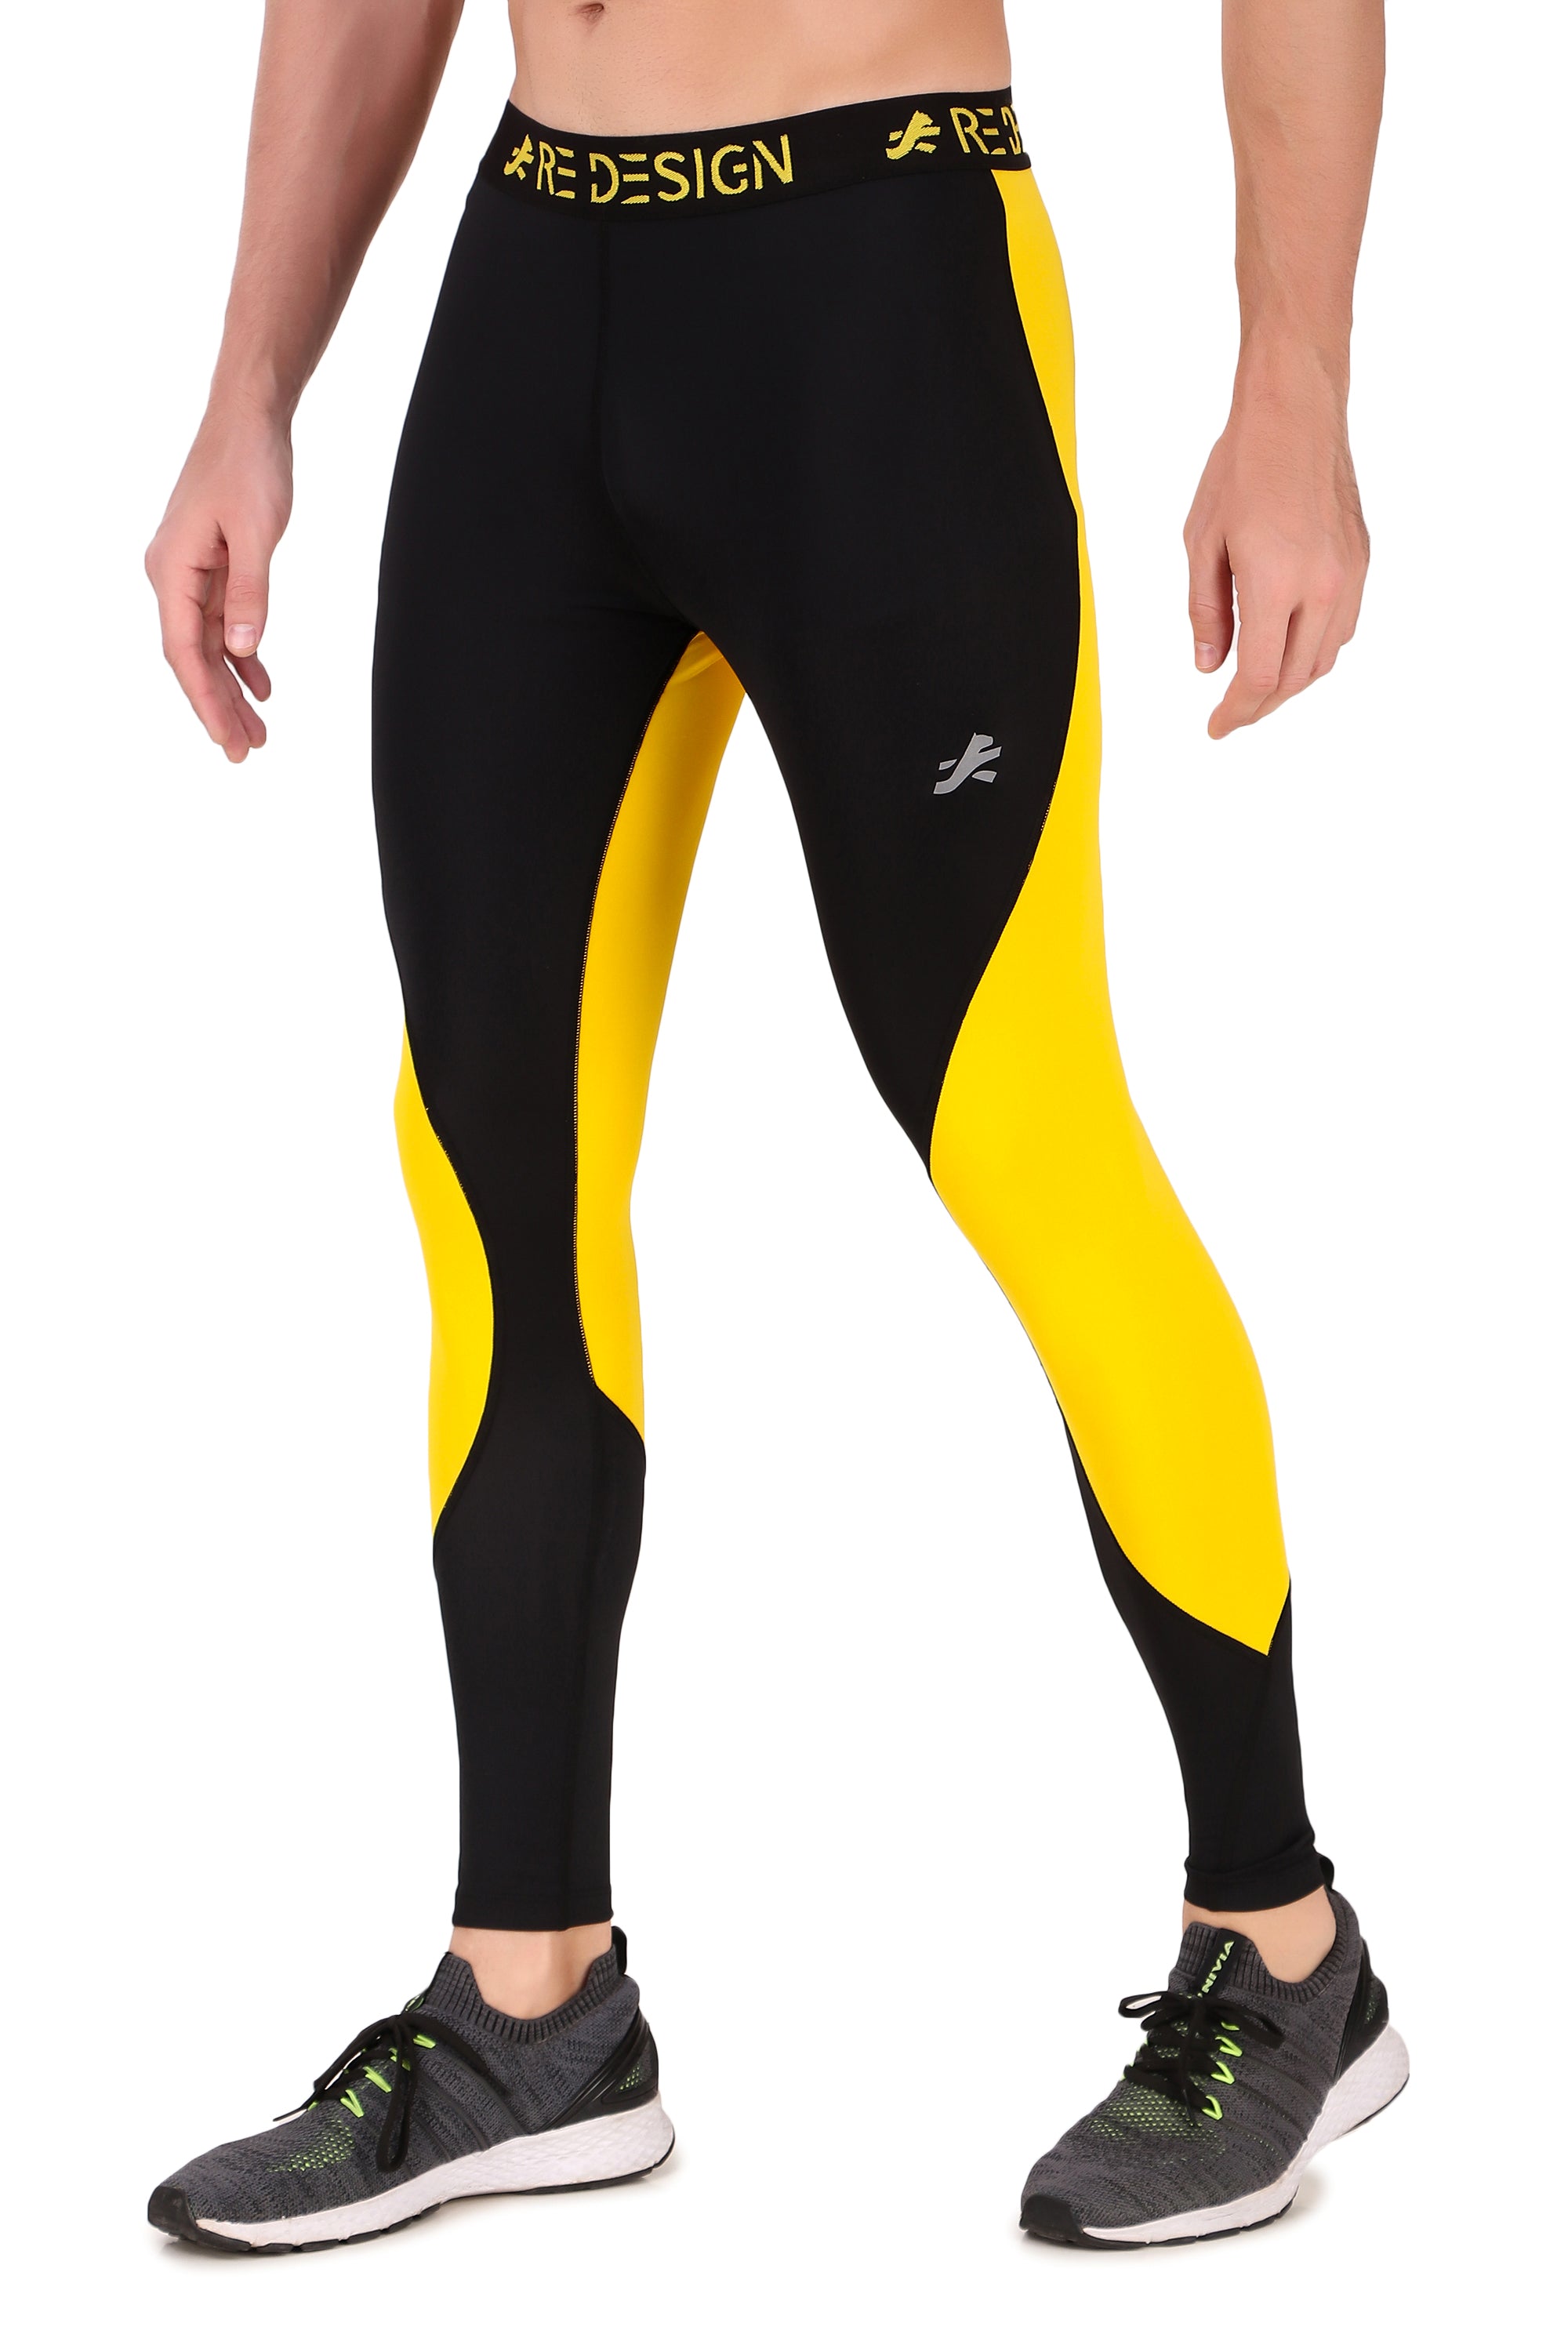 Men's Compression Pant – ReDesign Sports